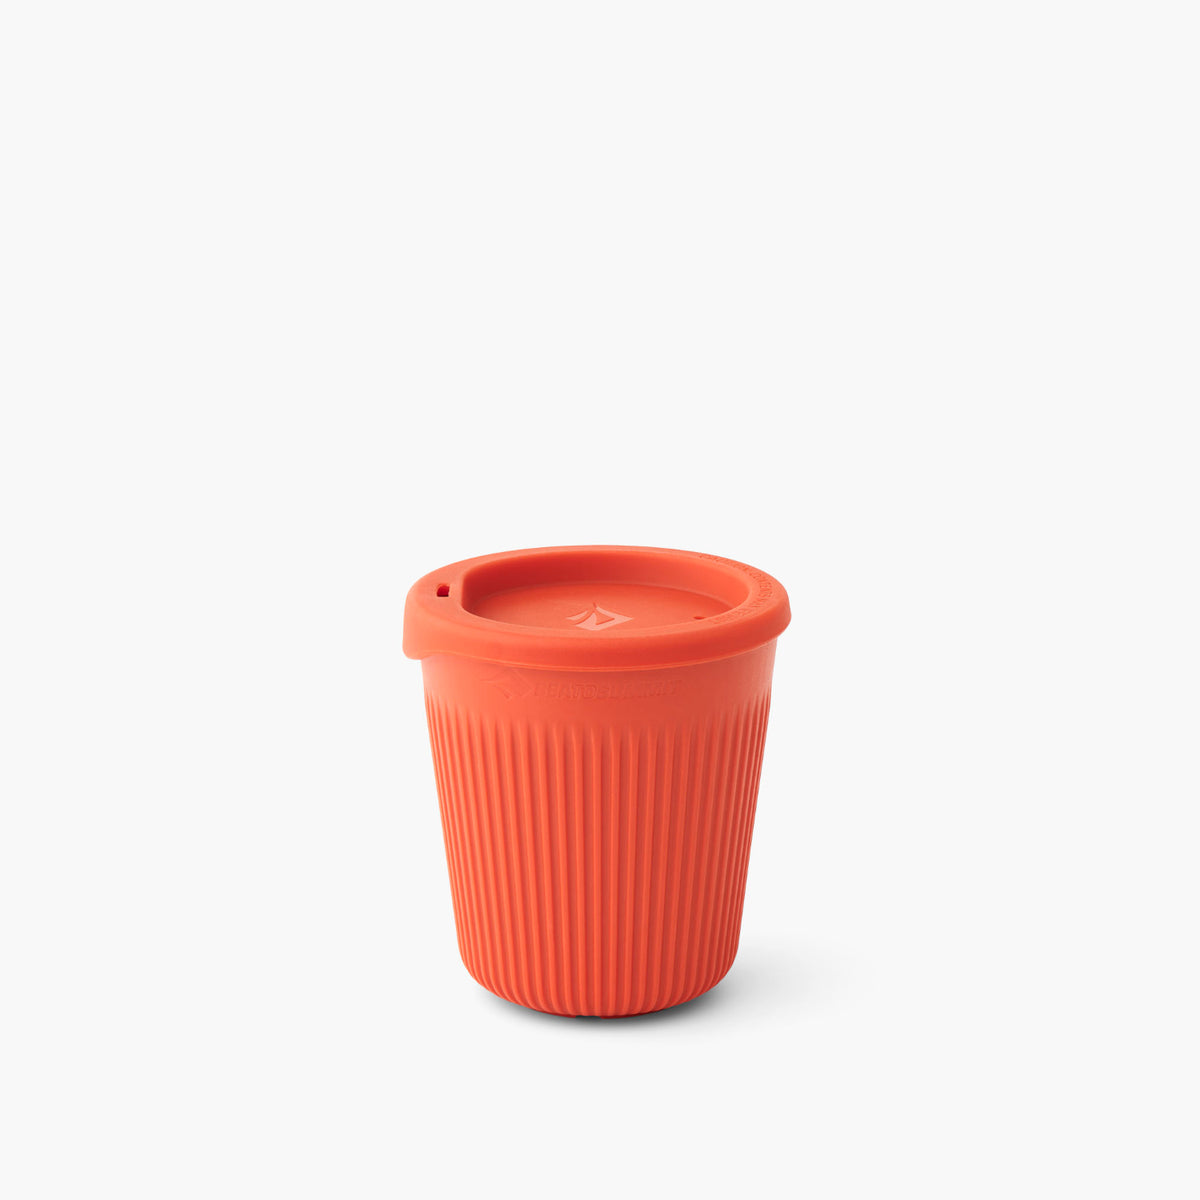 Sea to Summit Passage Cup in spicy orange colour